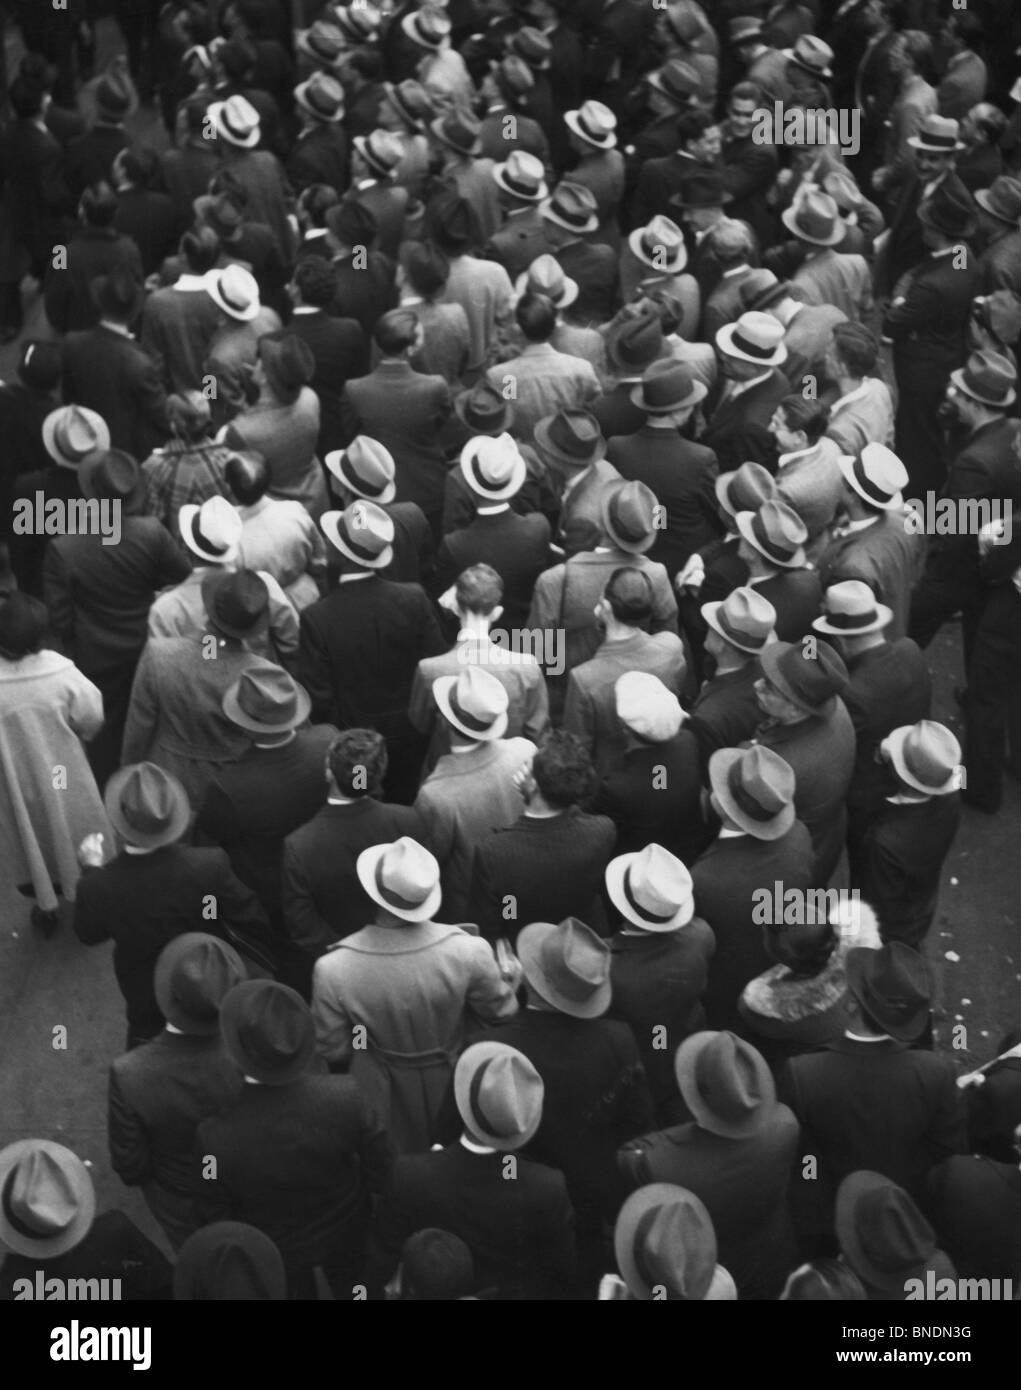 Crowd of people wearing hats Stock Photo